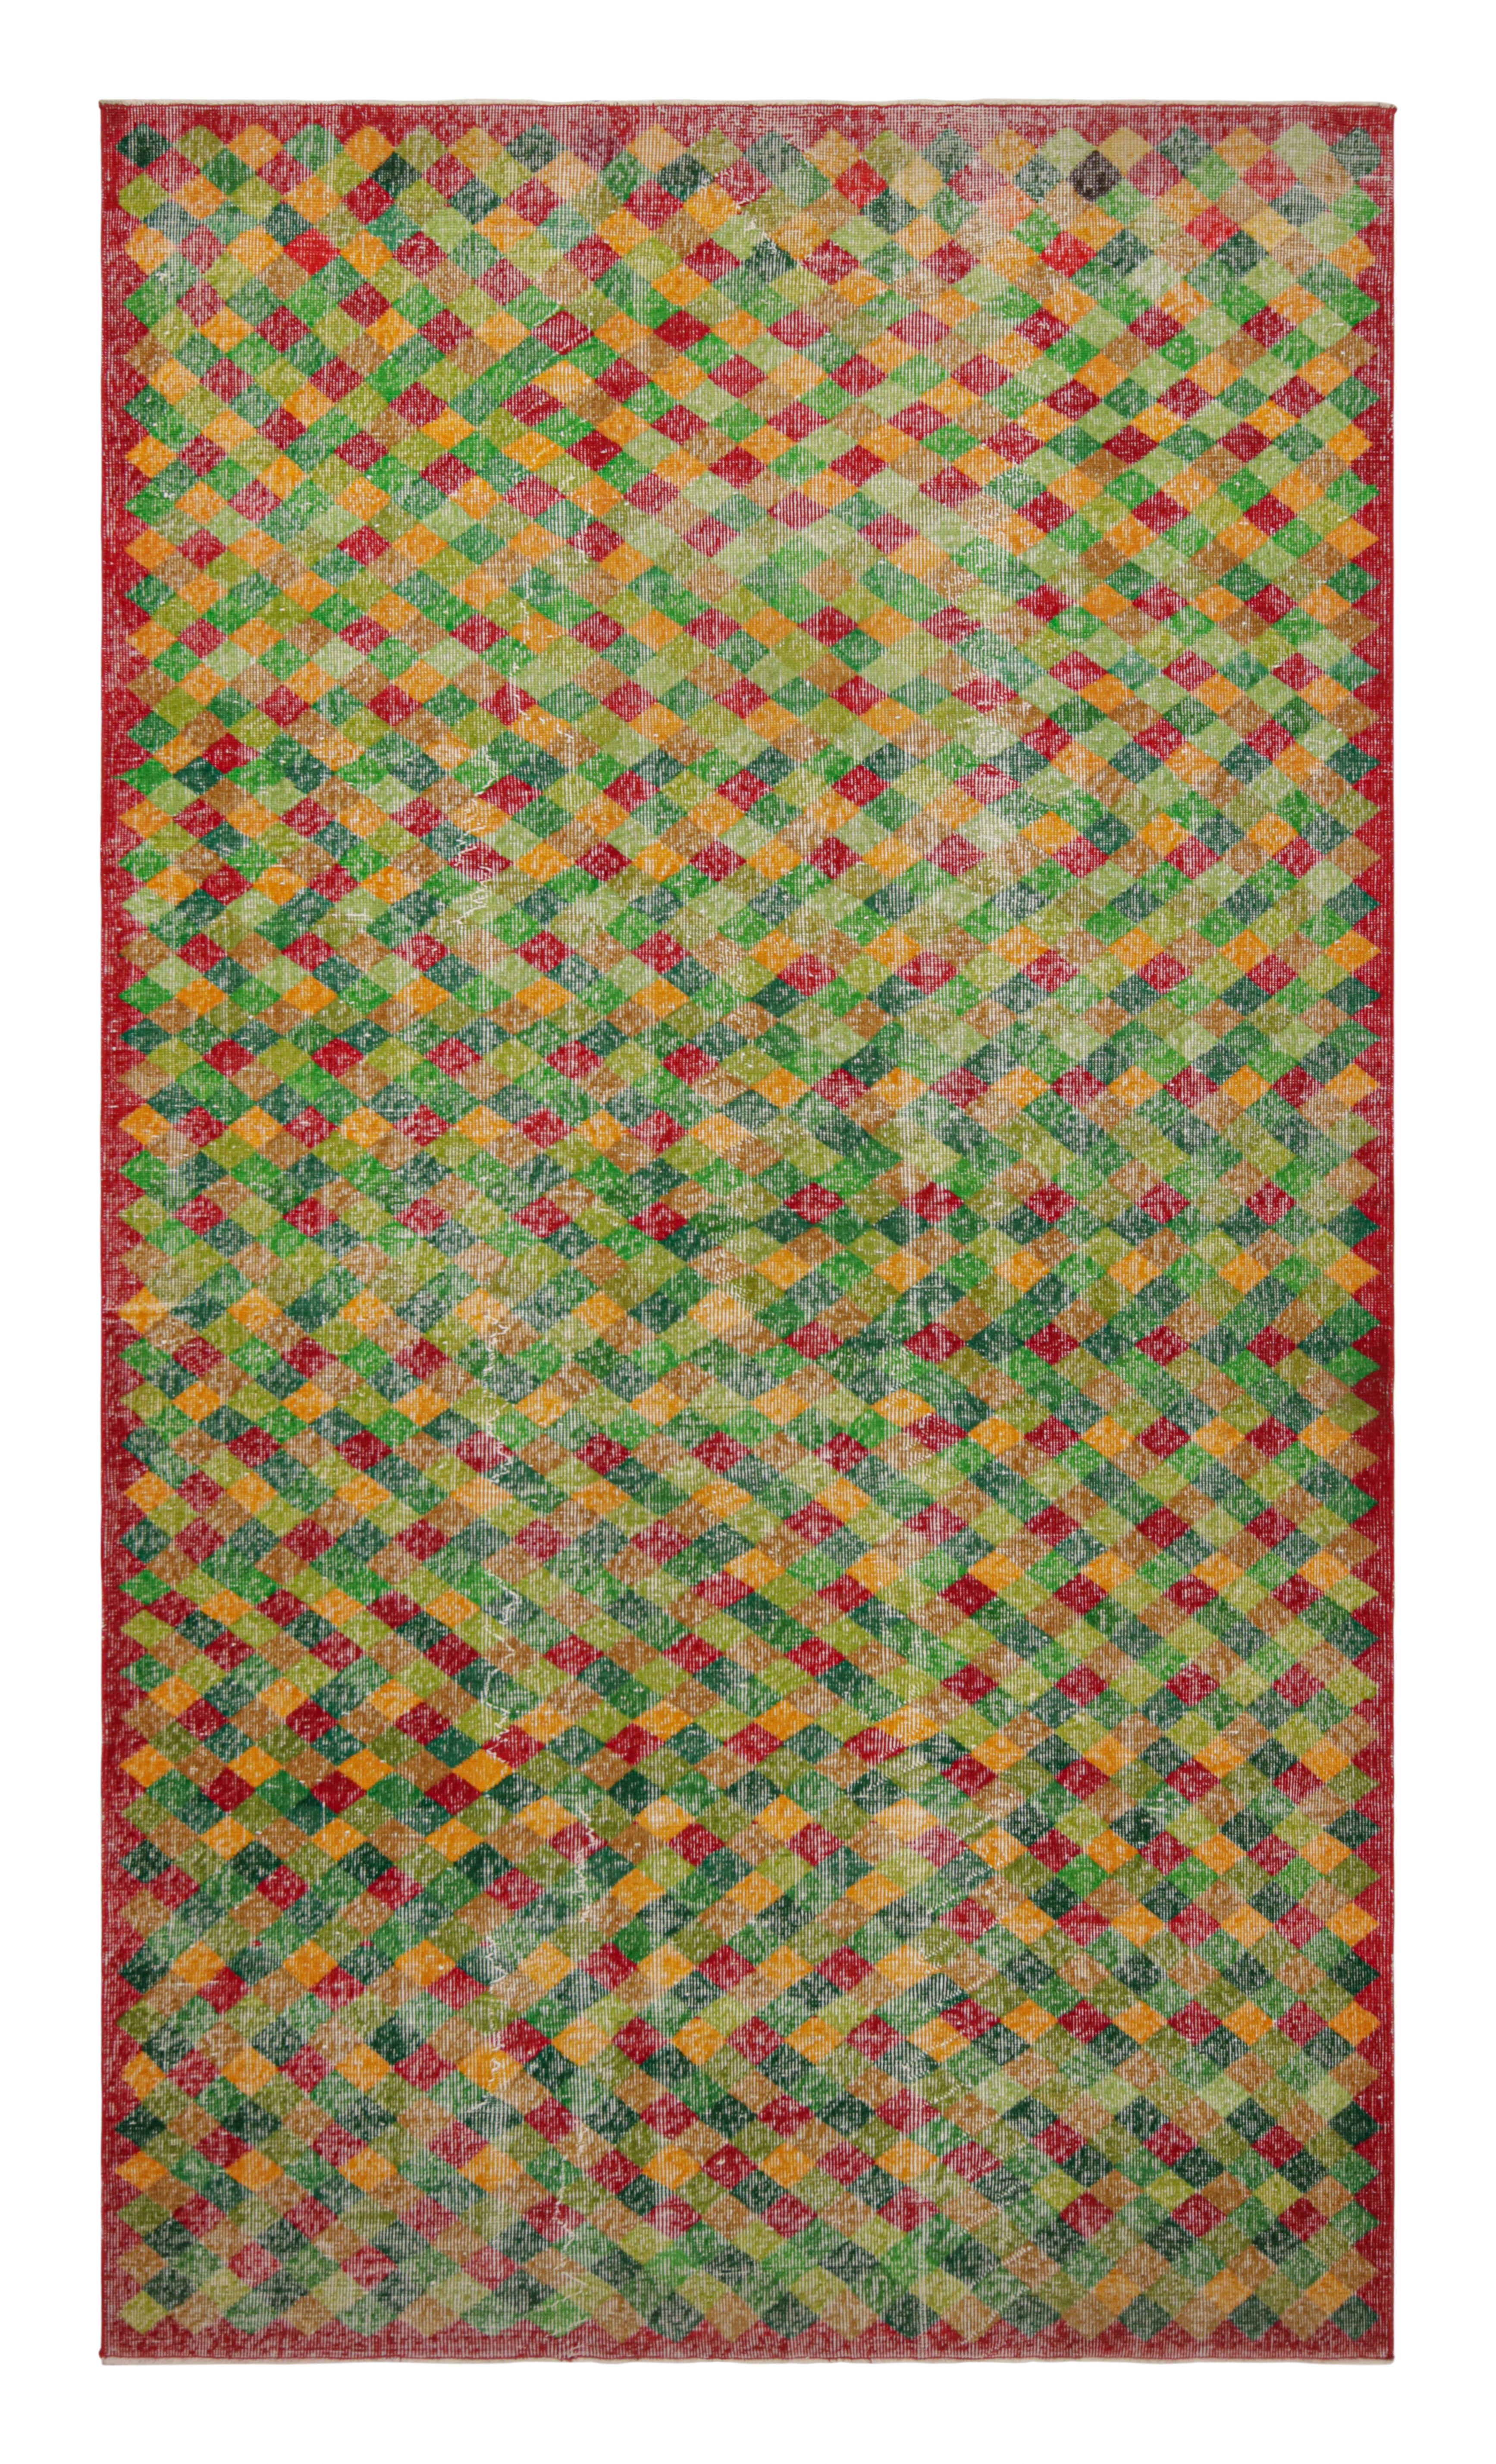 1960s Vintage Art Deco Rug in Green Yellow, Red Geometric Pattern by Rug & Kilim